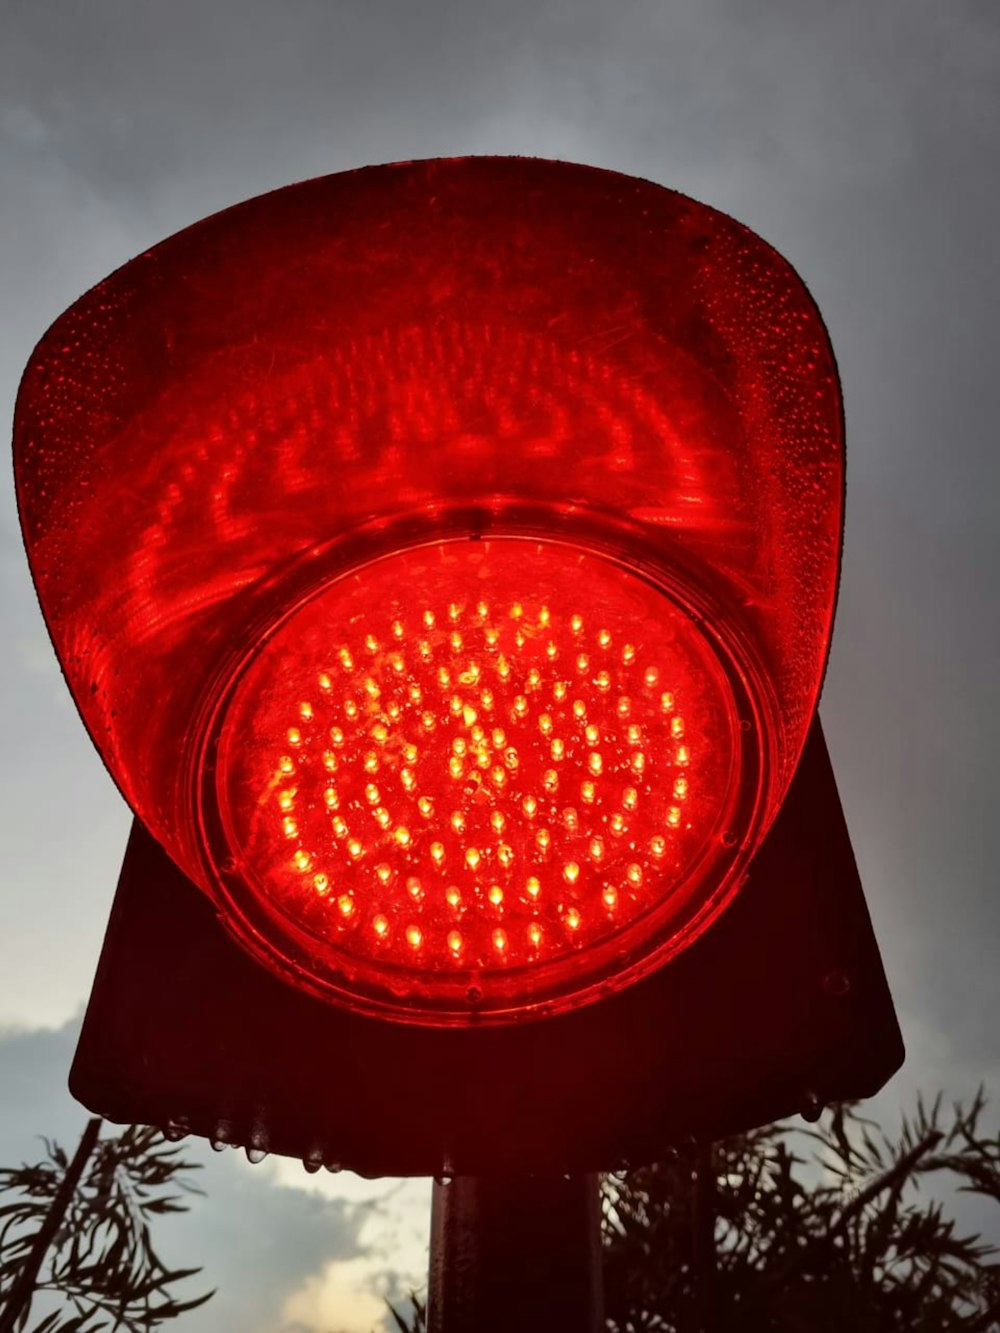 a red stop light